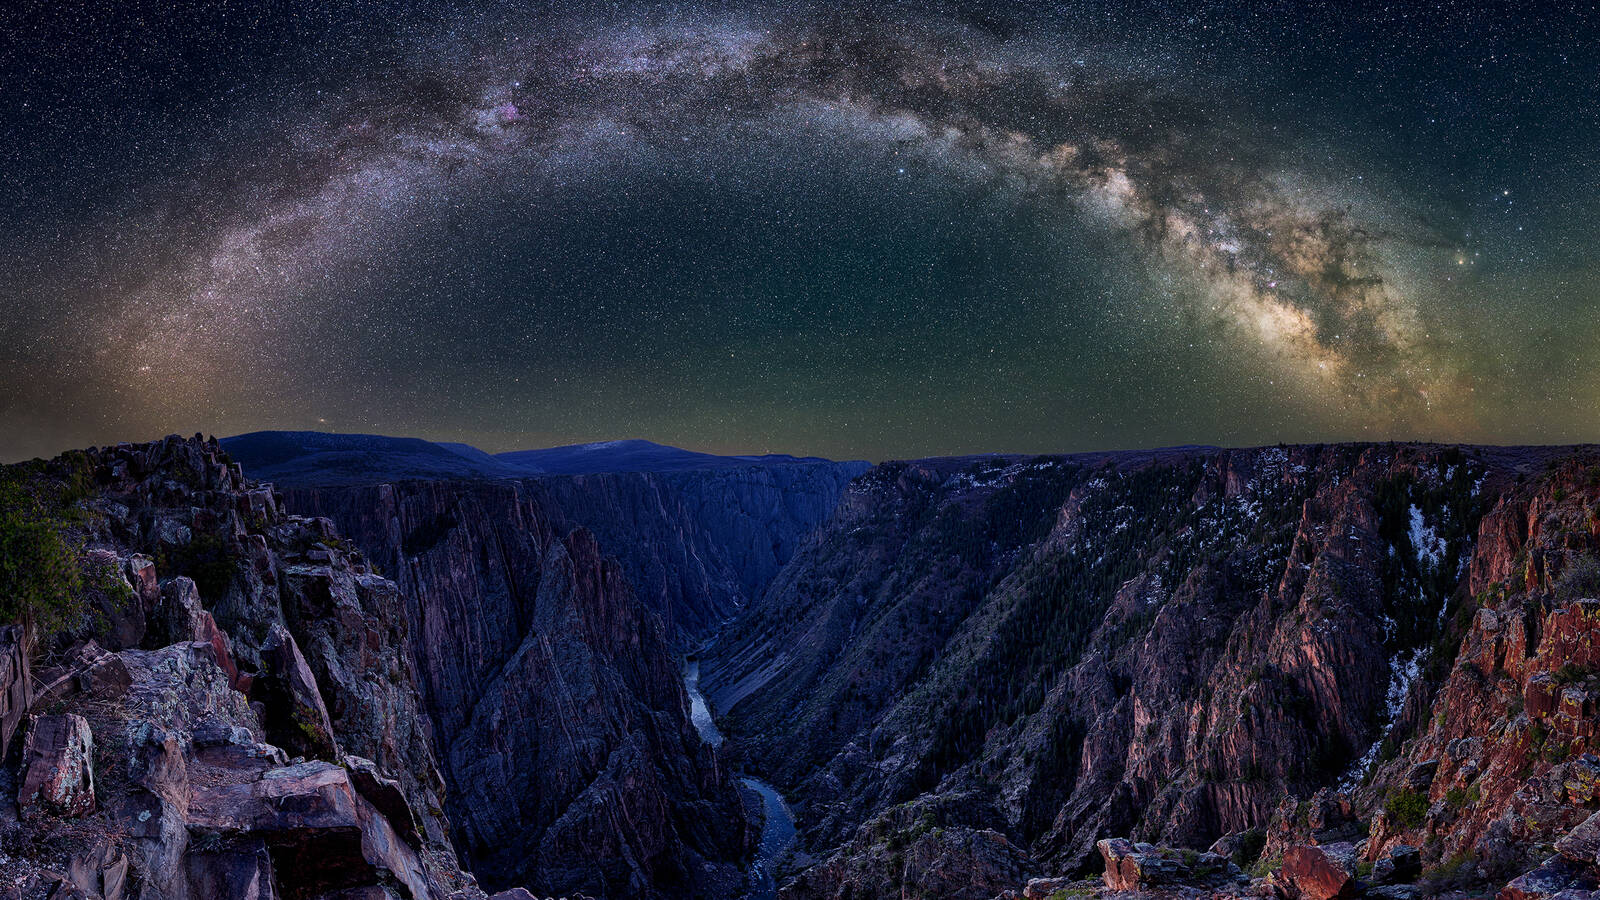 <p>Black Canyon of the Gunnison is known for its dark skies. The author lucked out and happened to visit the park during the peak of the Perseids, an annual meteor shower.</p>